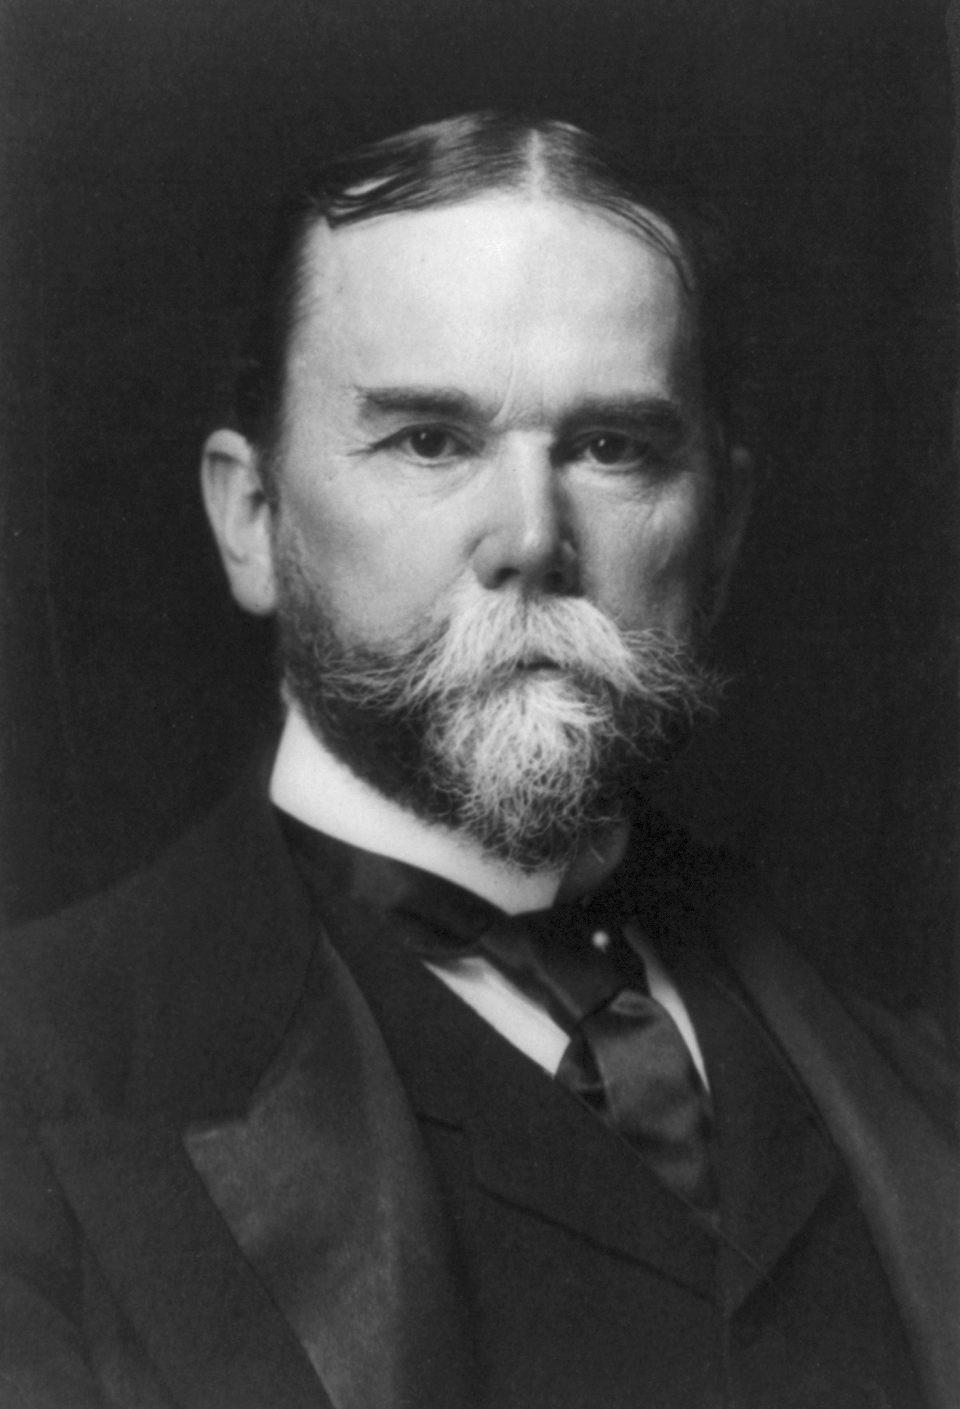 The Open Door Policy 1899: US Secretary of State John Hay sent his open door note : notification to other world powers that the US supported open trade in